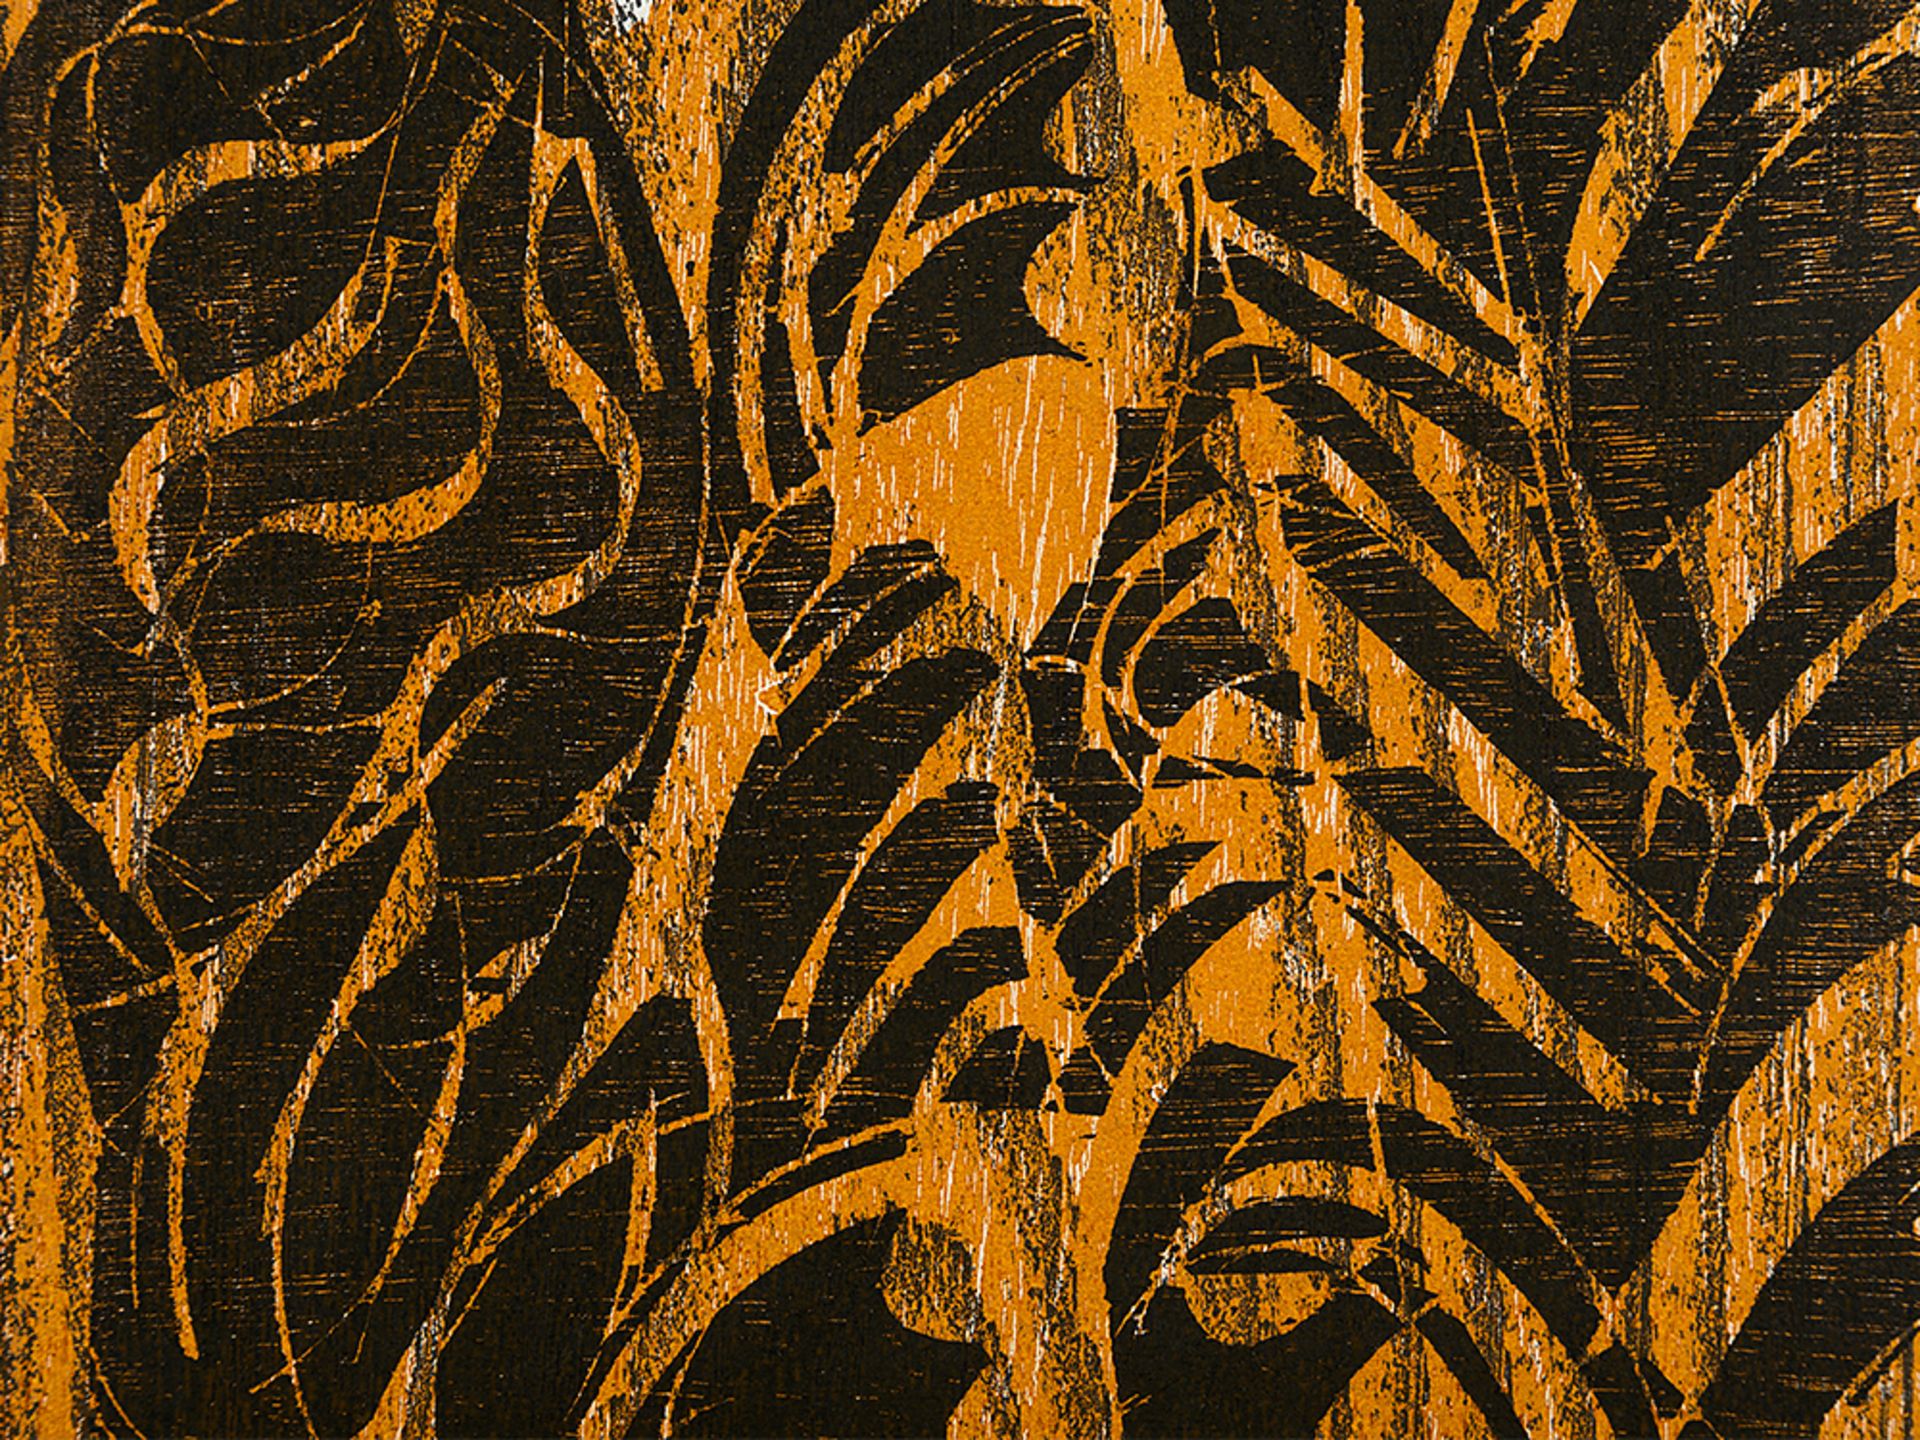 HAP Grieshaber, Steppengras, Woodcut in Colors, 1972 - Image 10 of 14